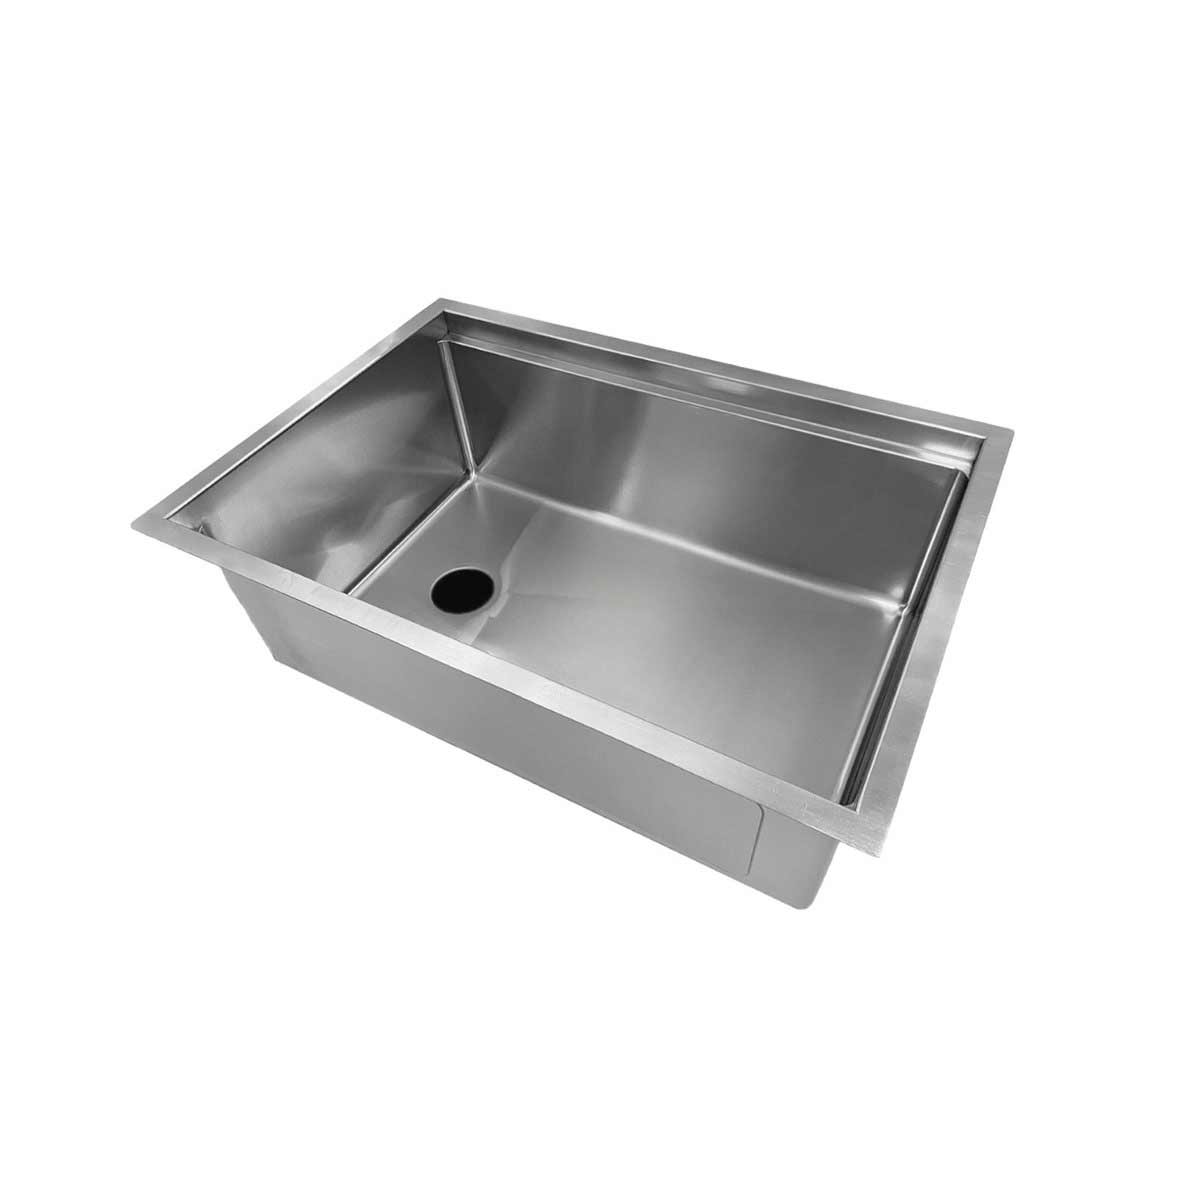 28 inch stainless steel undermount workstation sink with ten inch depth and reversible seamless drain.